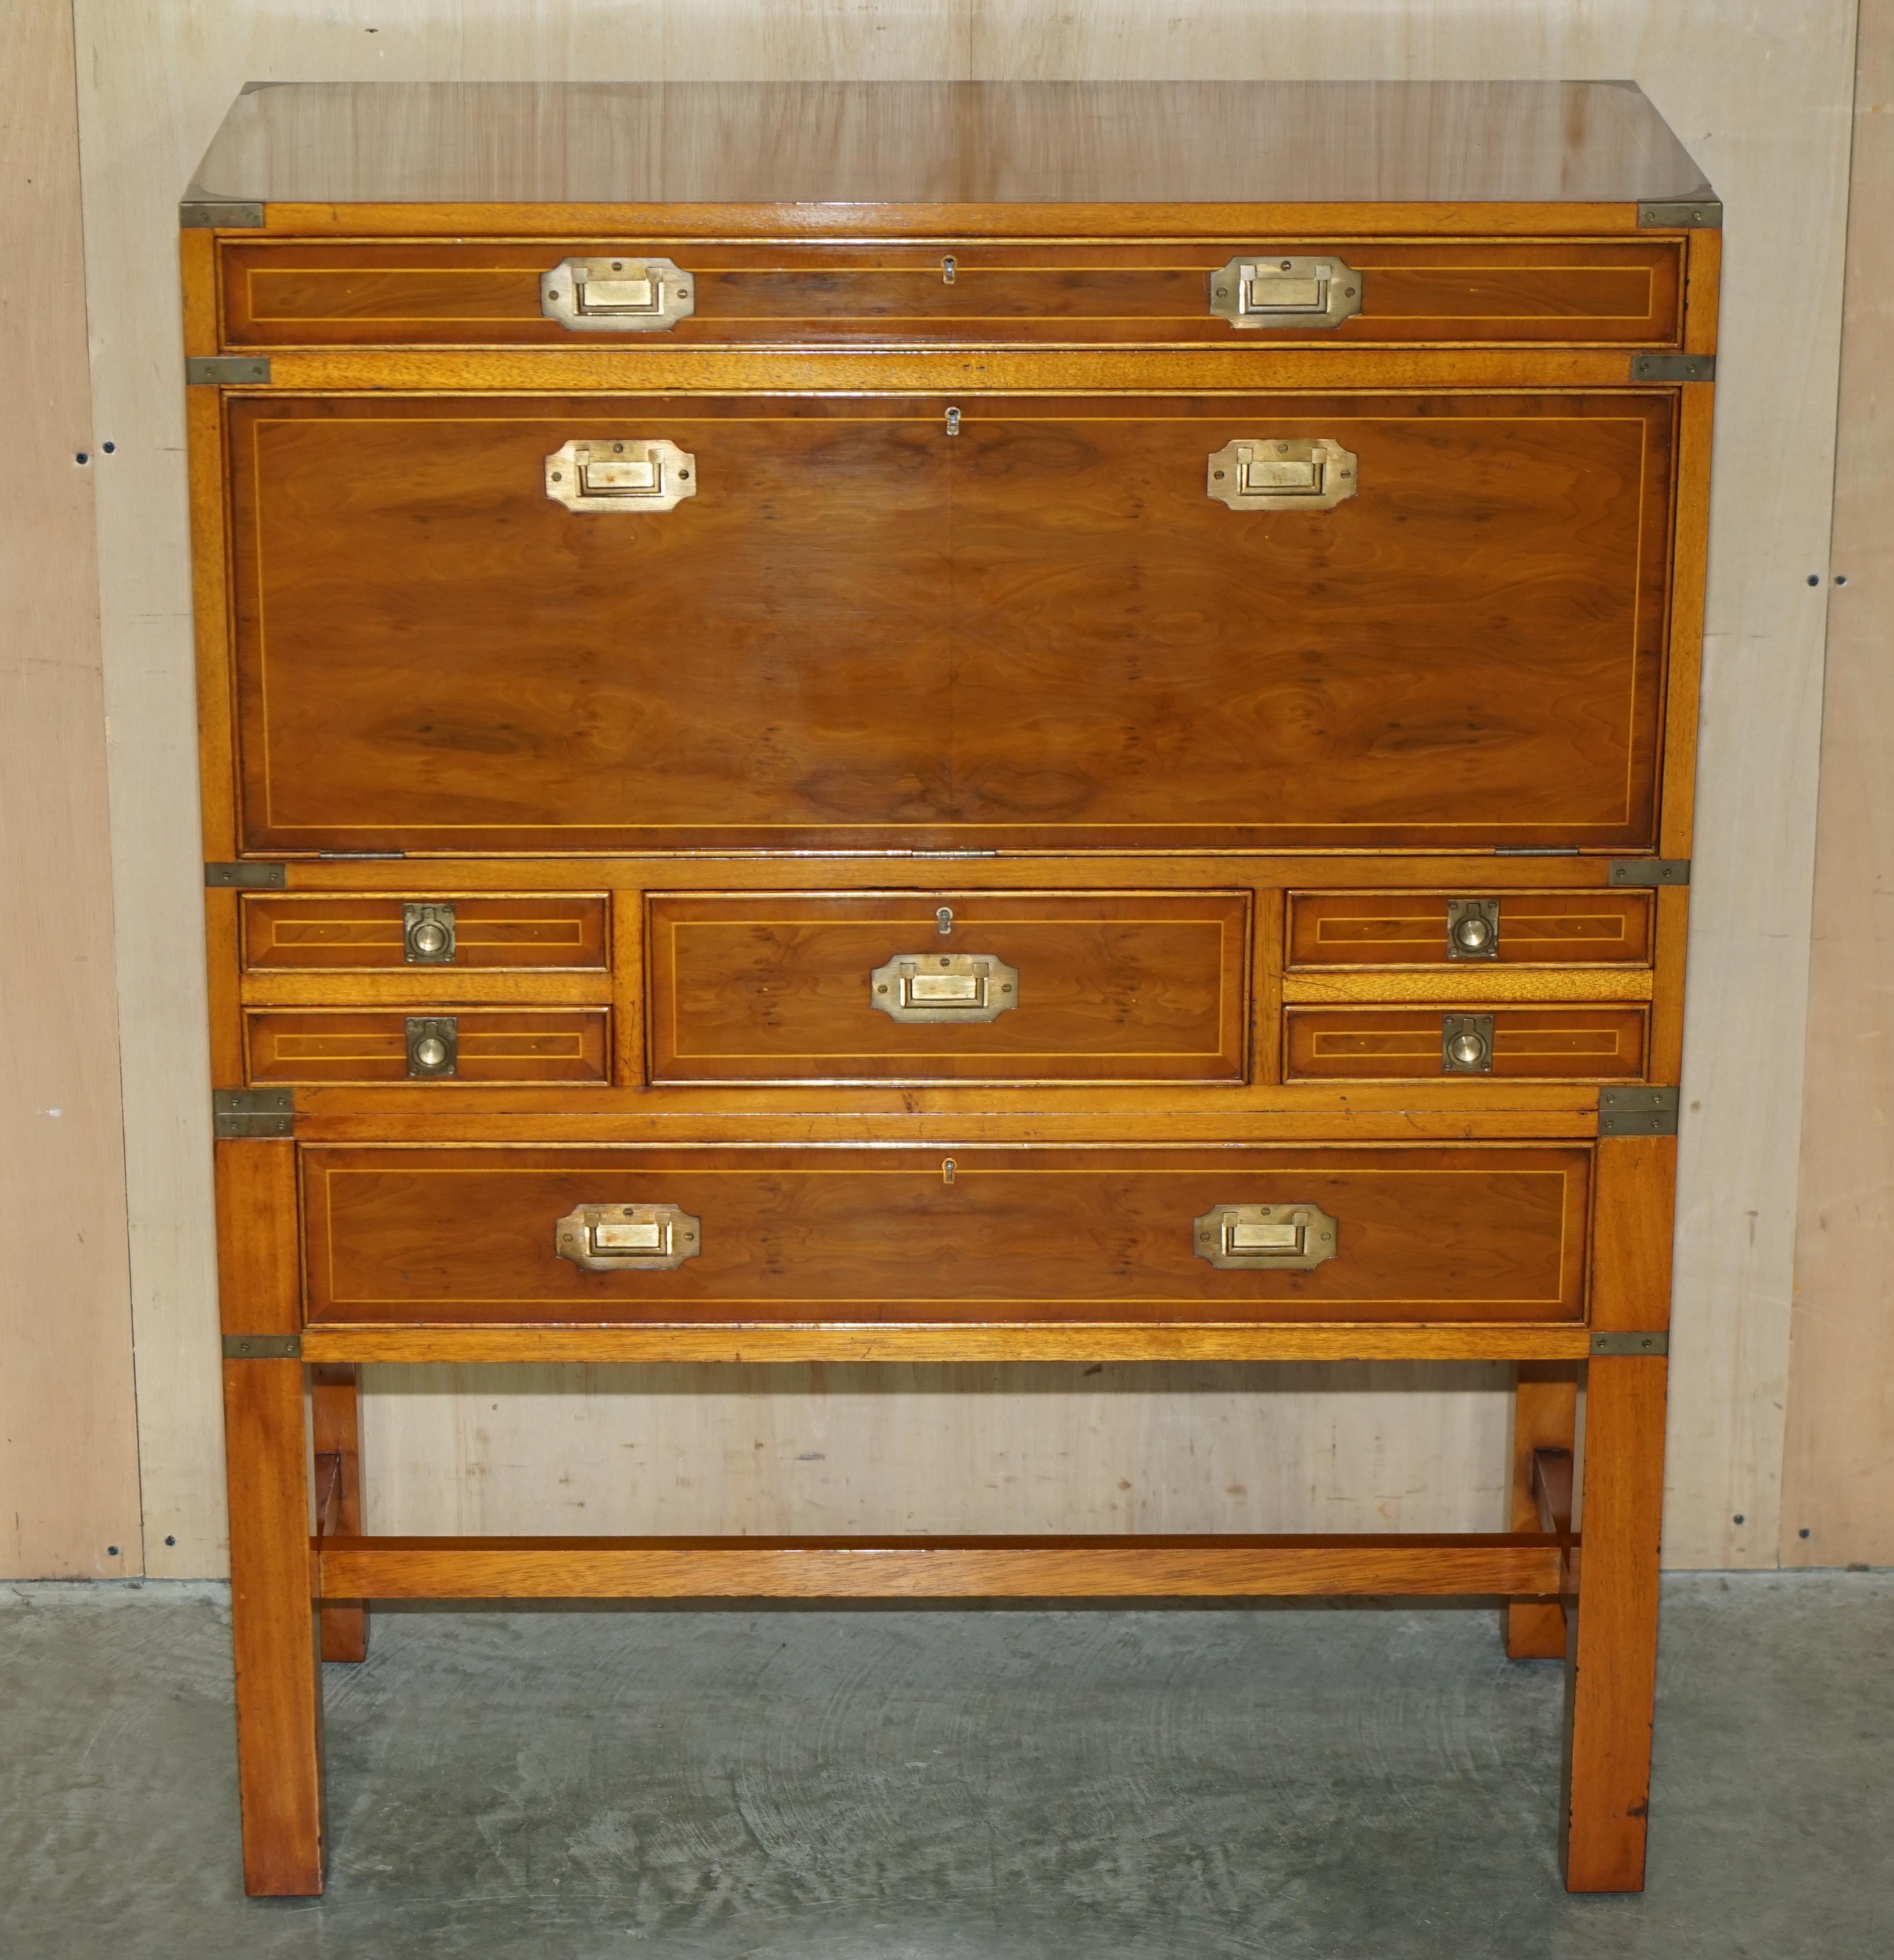 We are delighted to offer for sale this lovely hand made in England Harrods Kennedy Military Campaign, Secrataire desk with drawers

A very good looking well made and decorative piece. It sits as a campaign chest on stand however it has the